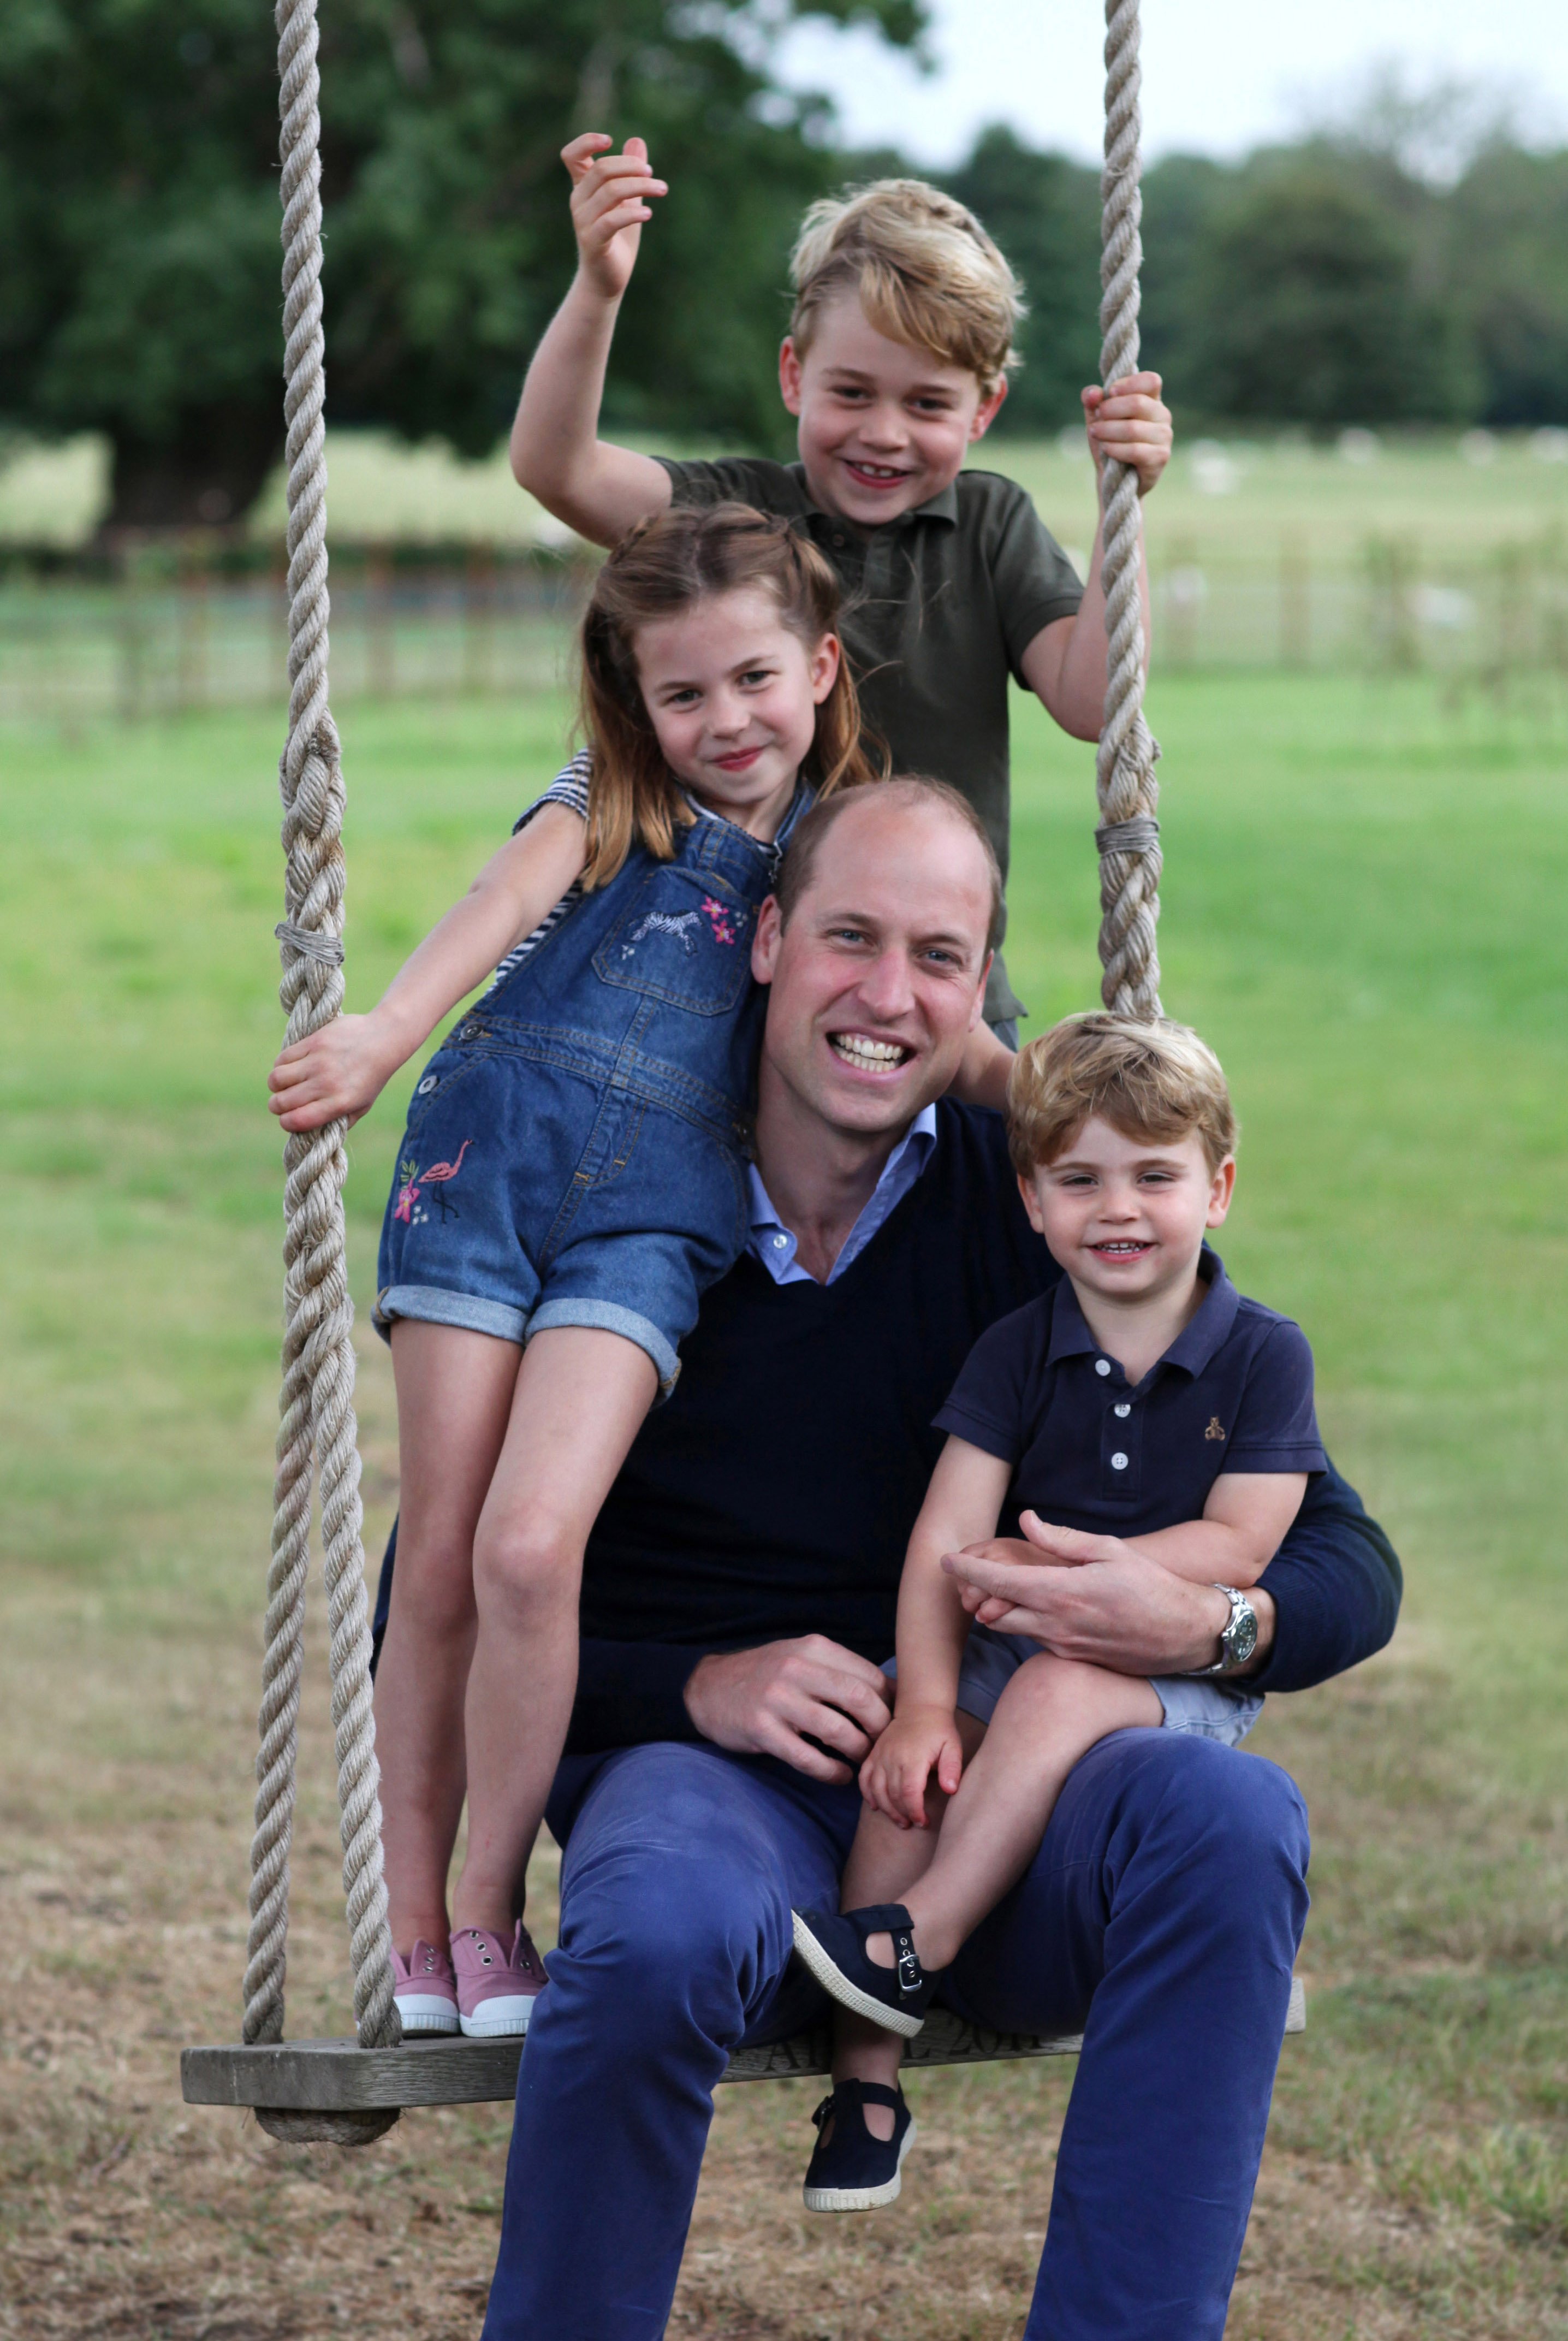 The Duke of Cambridge poses on a swing with Prince George, Princess Charlotte and Prince Louis to mark both his birthday and Fathers Day | Source: Getty Images